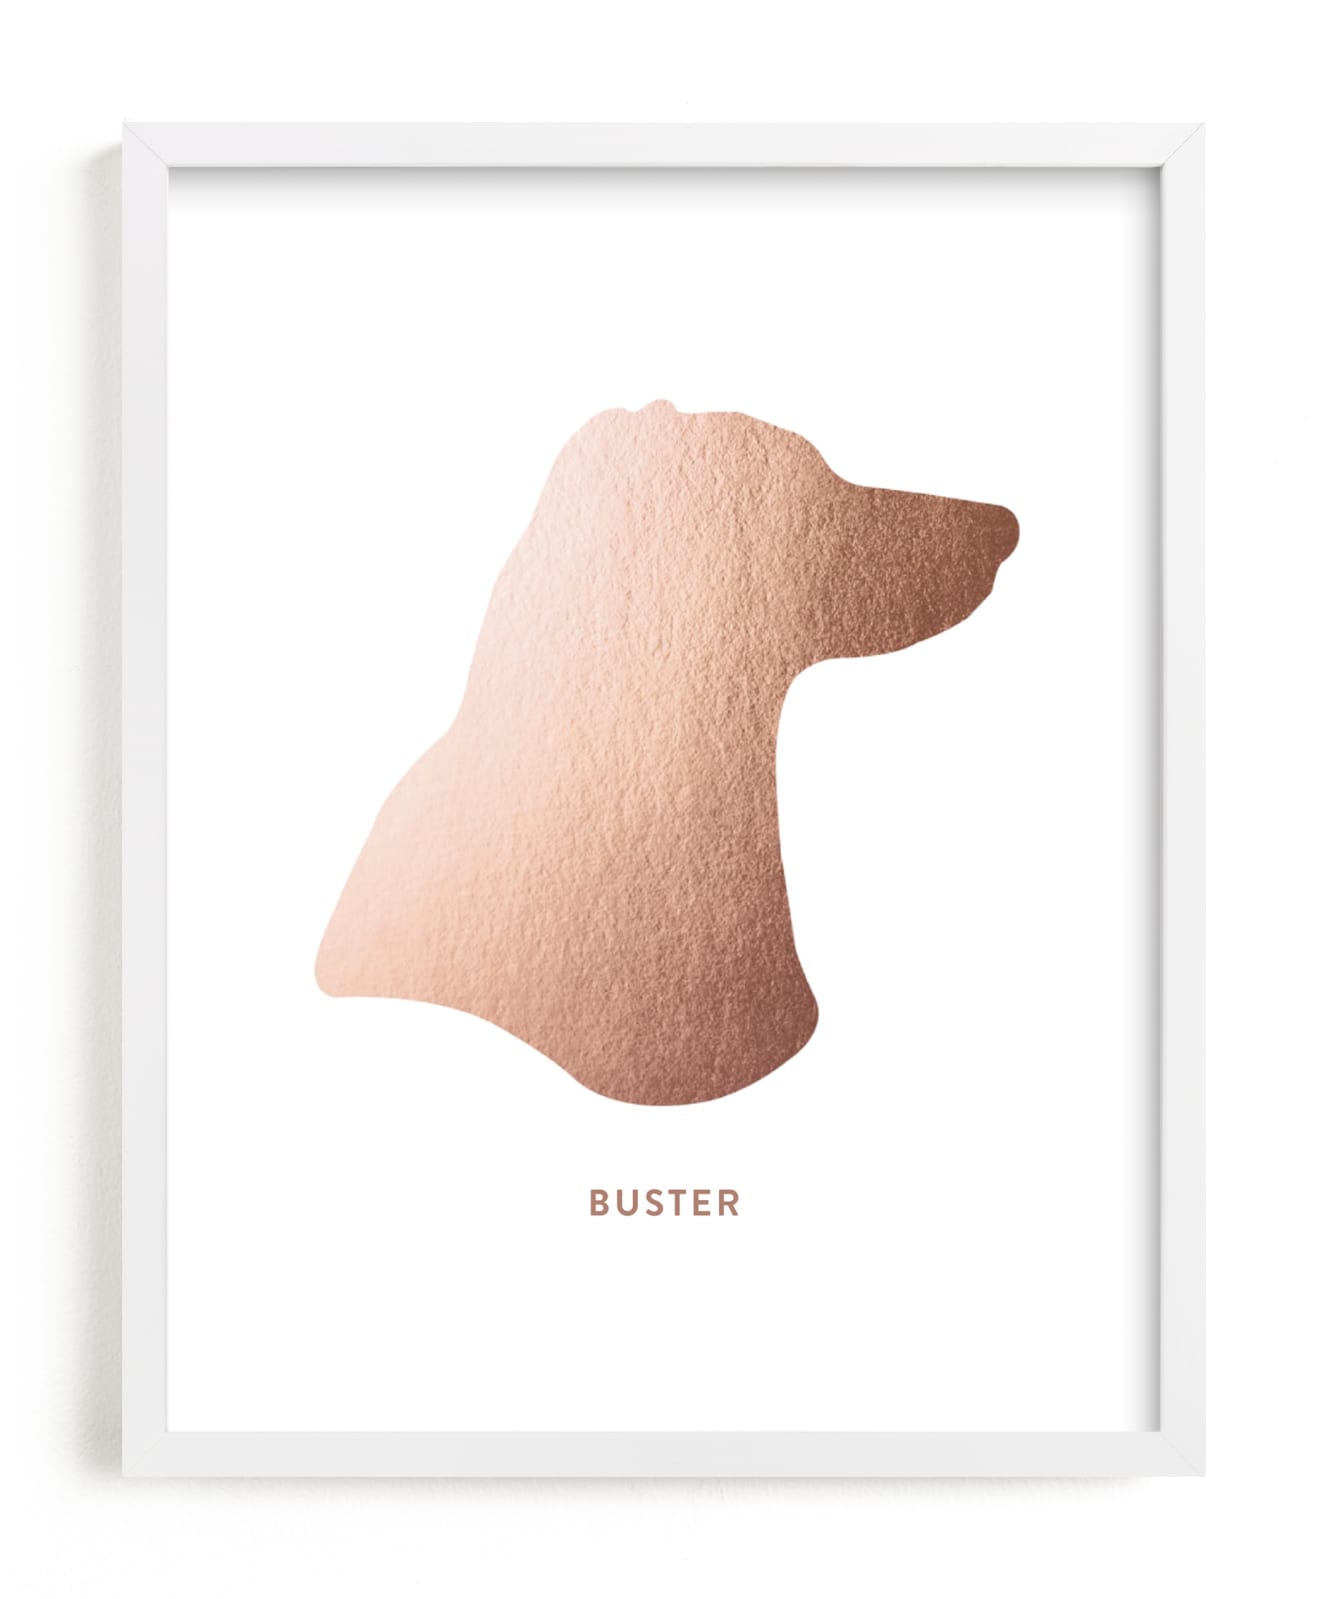 This is a rosegold silhouette art by Minted called Custom Pet Silhouette Foil Art.